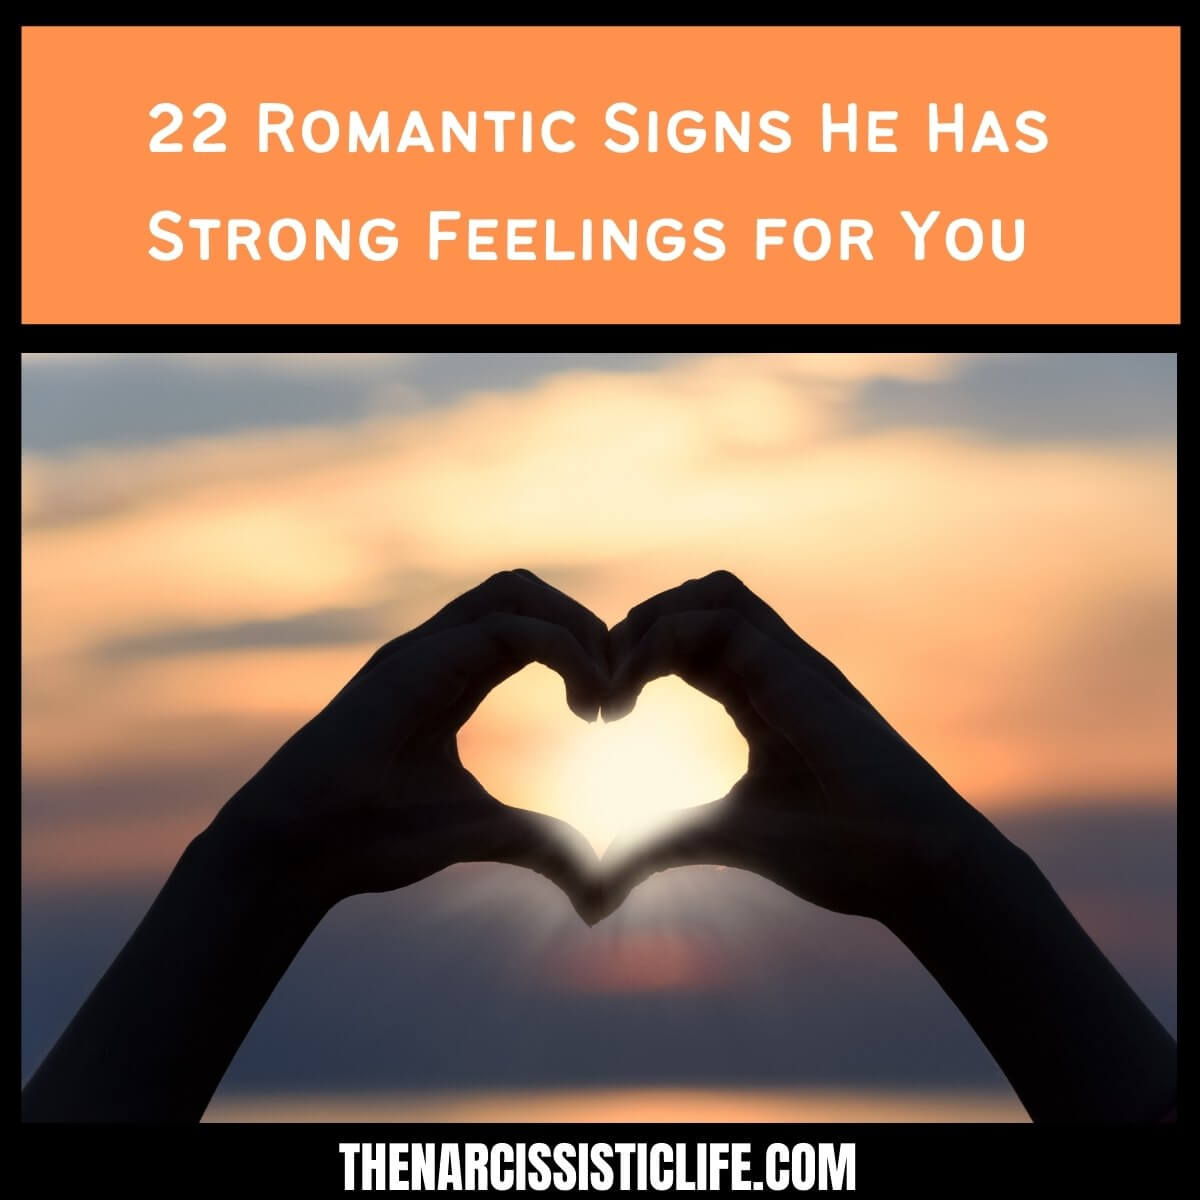 22 Romantic Signs He Has Strong Feelings for You